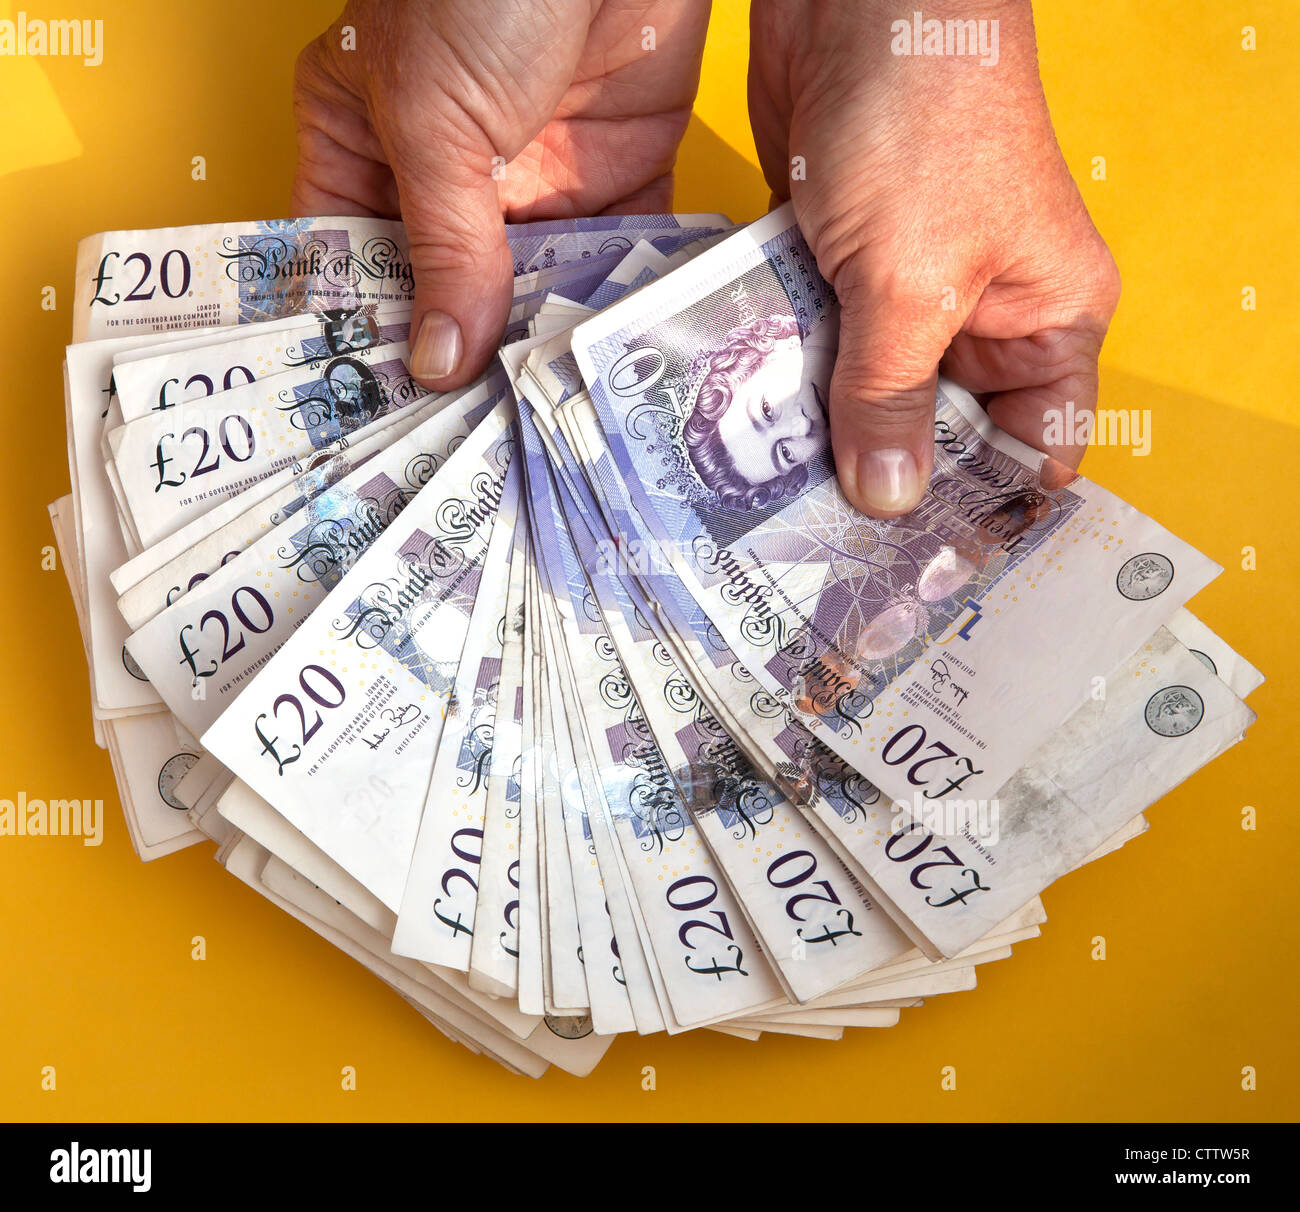 Cash in hand Stock Photo